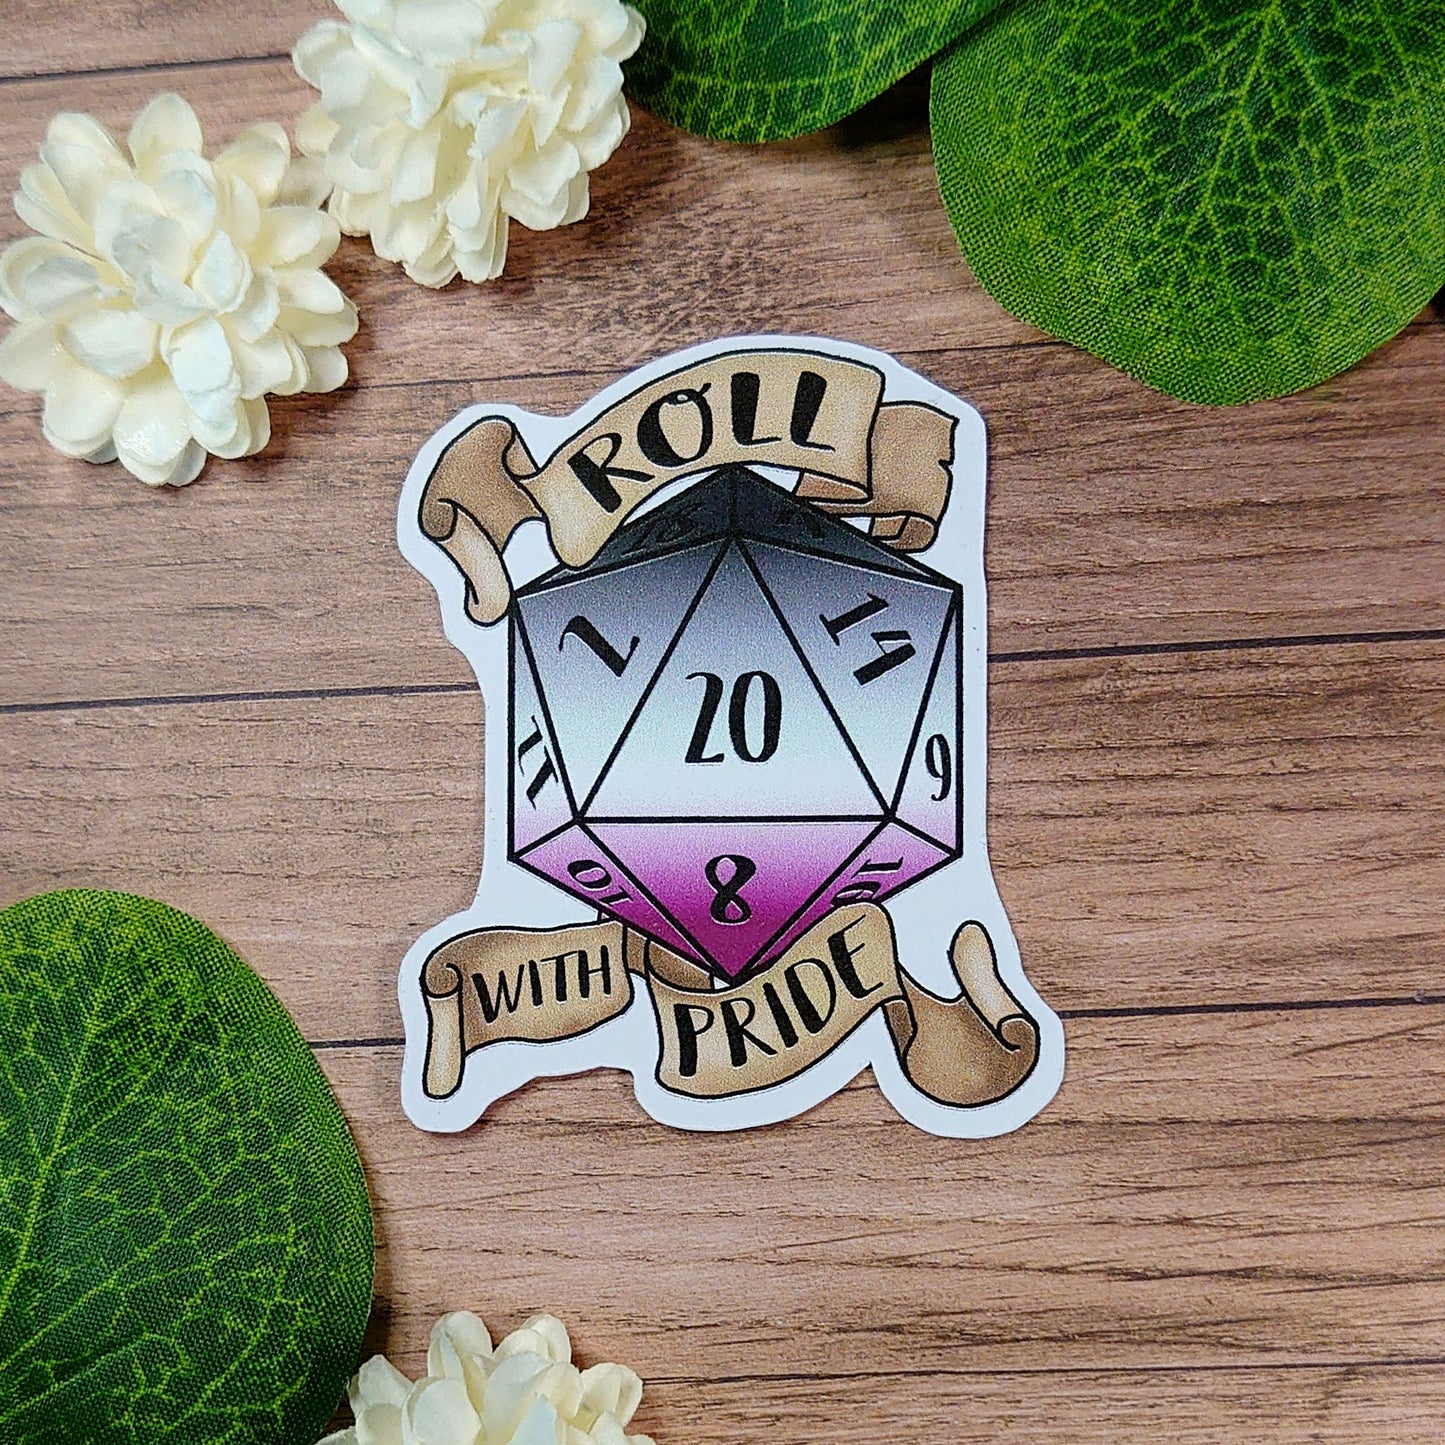 Asexual/Ace - D20 Pride Sticker - Decoration, Roleplaying, Scrapbooking Vinyl Sticker - Different Sizes